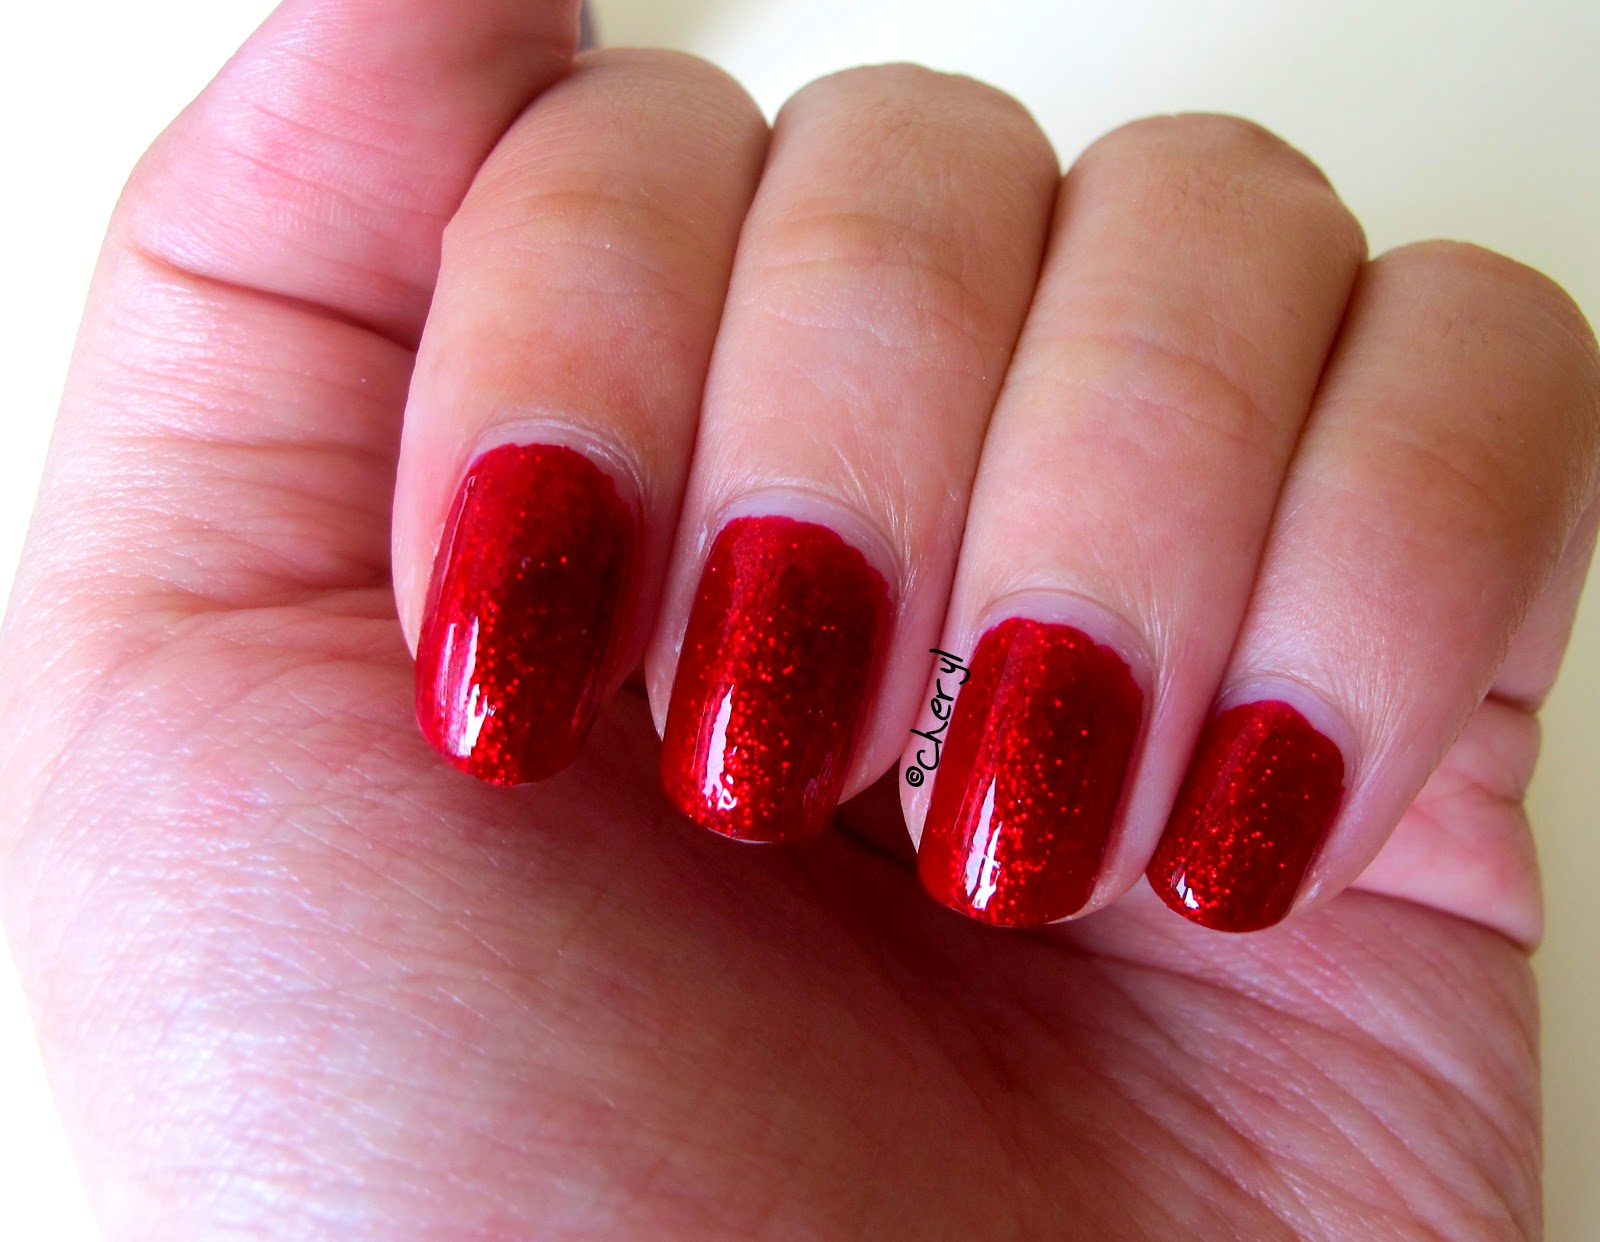 8. China Glaze Nail Lacquer in "Ruby Pumps" - wide 10